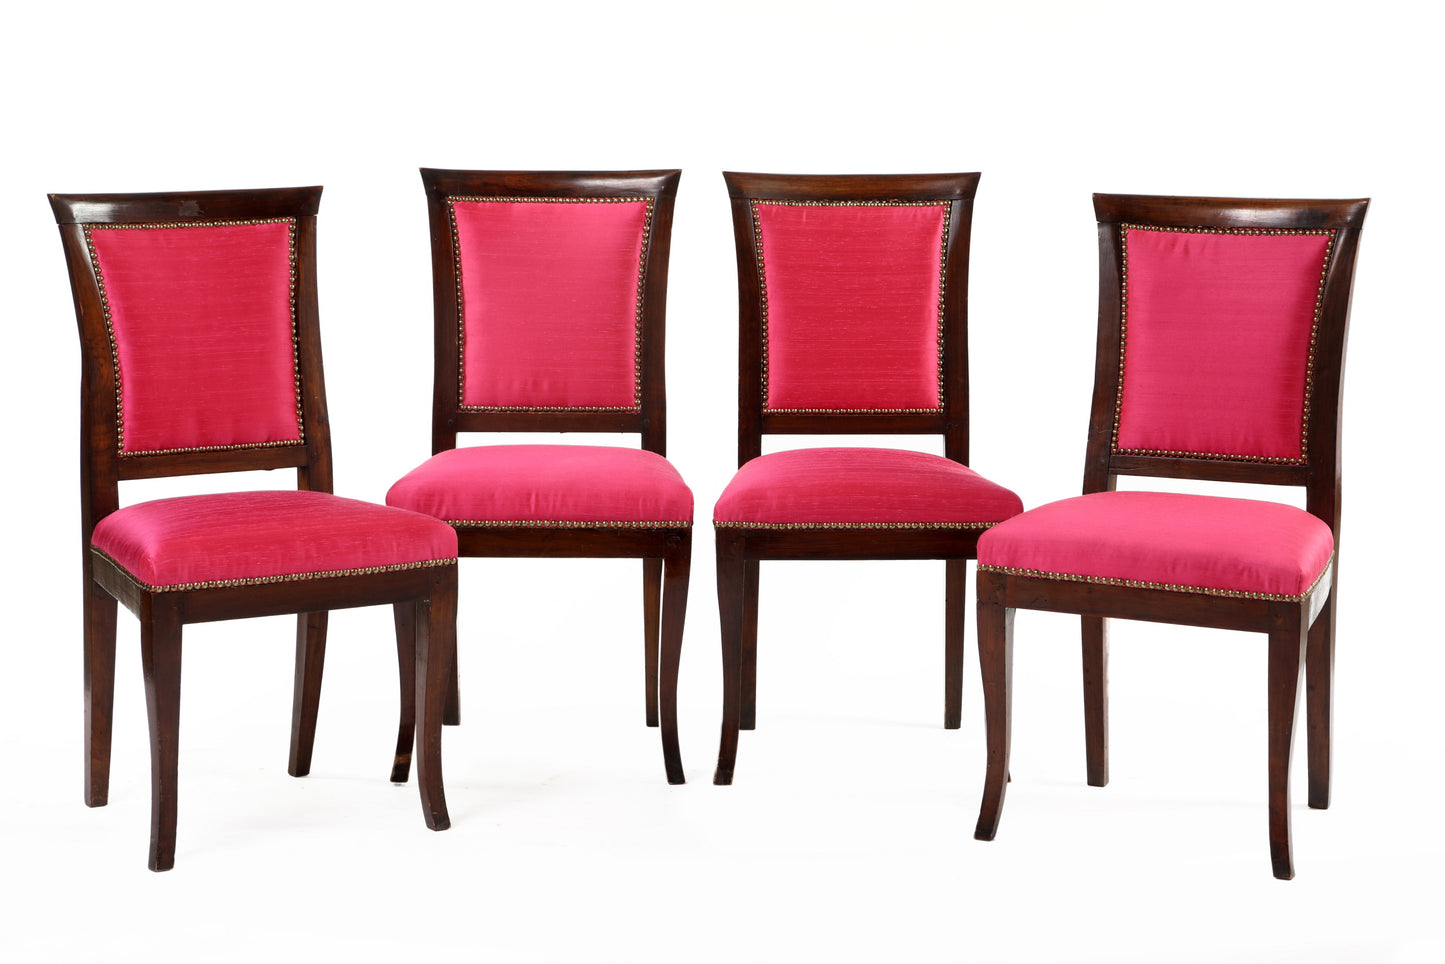 Six 1950s chairs in pink fabric